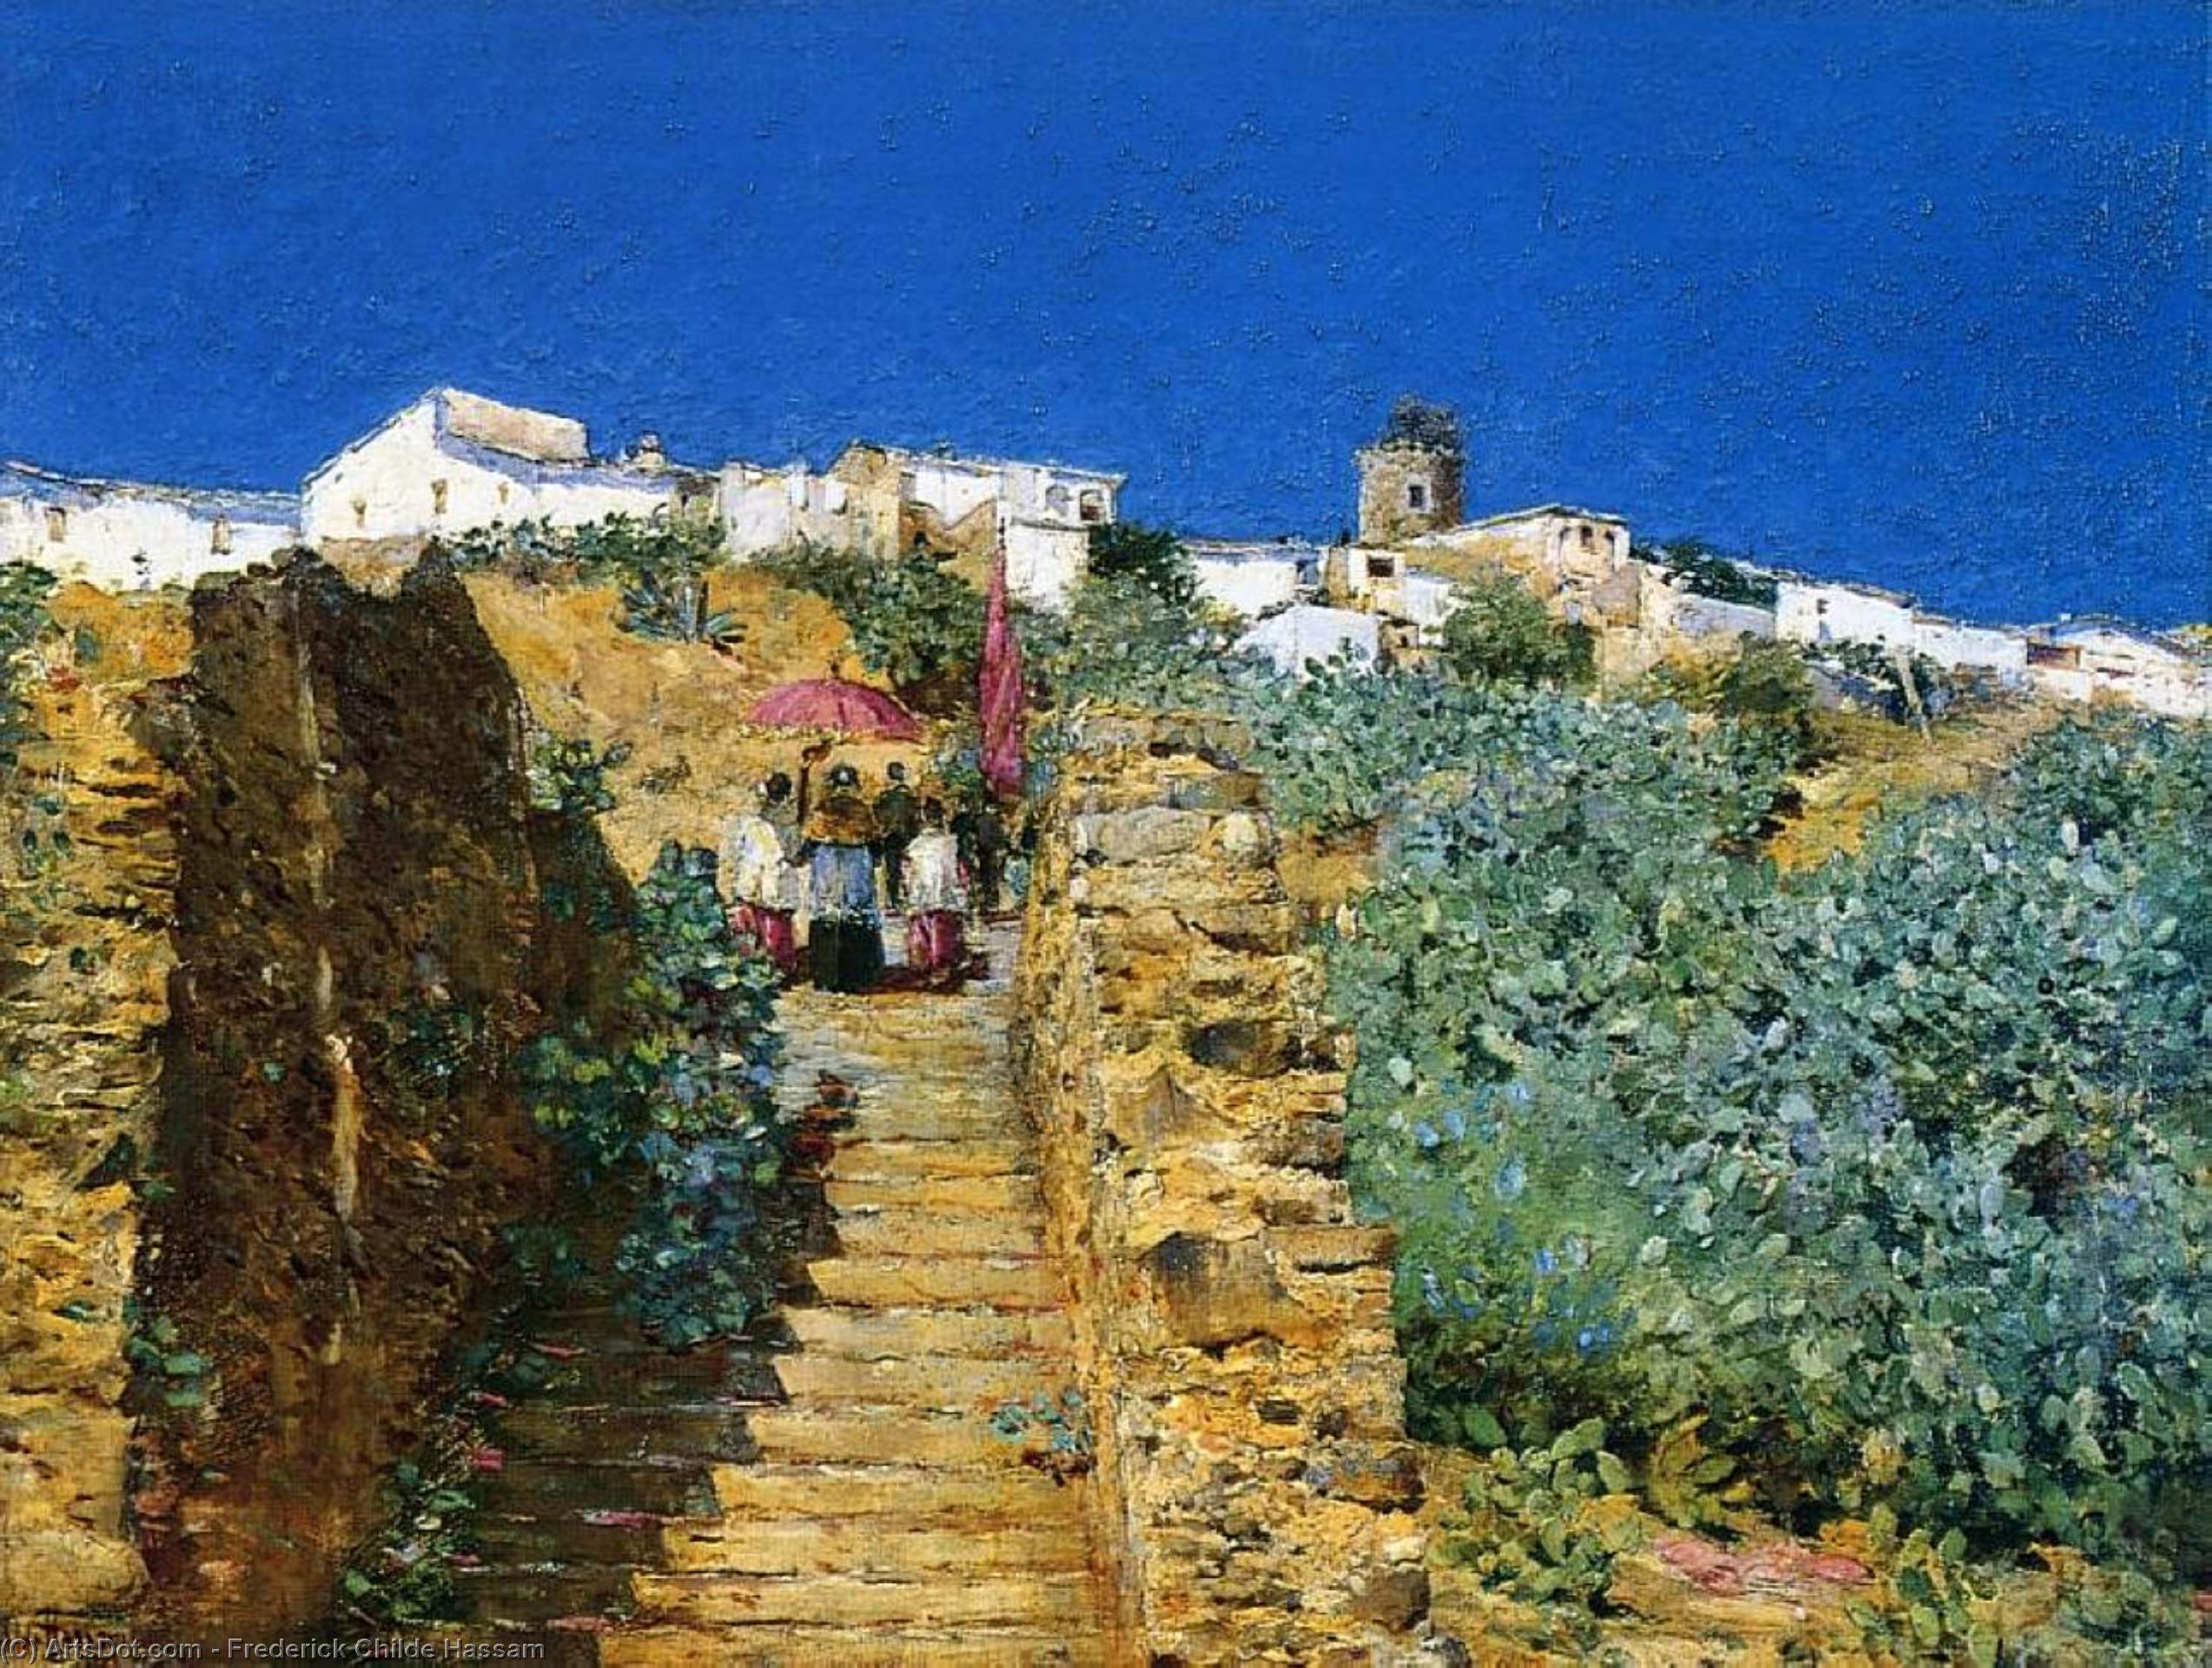 Order Paintings Reproductions Church Procession, Spanish Steps, 1883 by Frederick Childe Hassam (1859-1935, United States) | ArtsDot.com